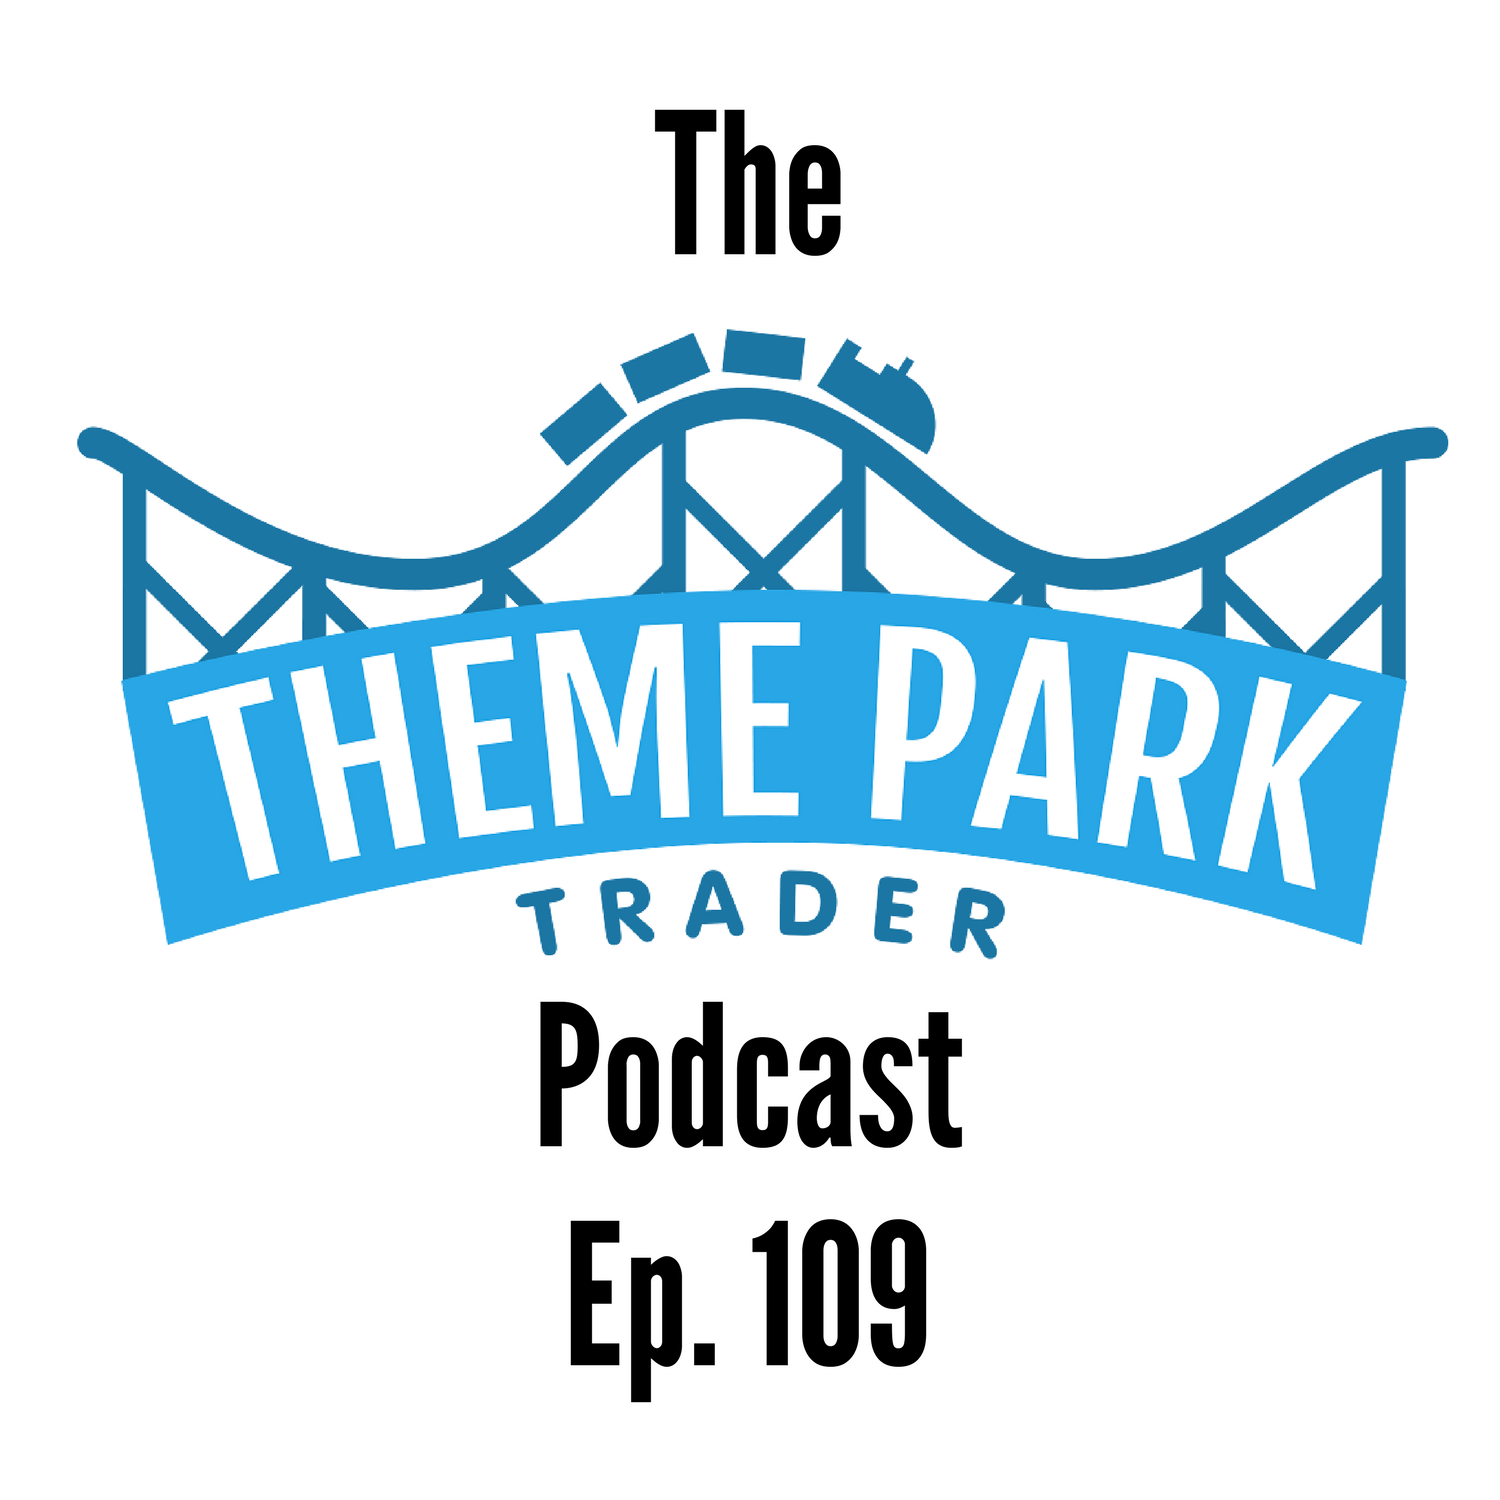 Episode 109 - Chloe Nixon Joins Us to Talk About Joining the Disney Cultural Exchange Programme in Walt Disney World!